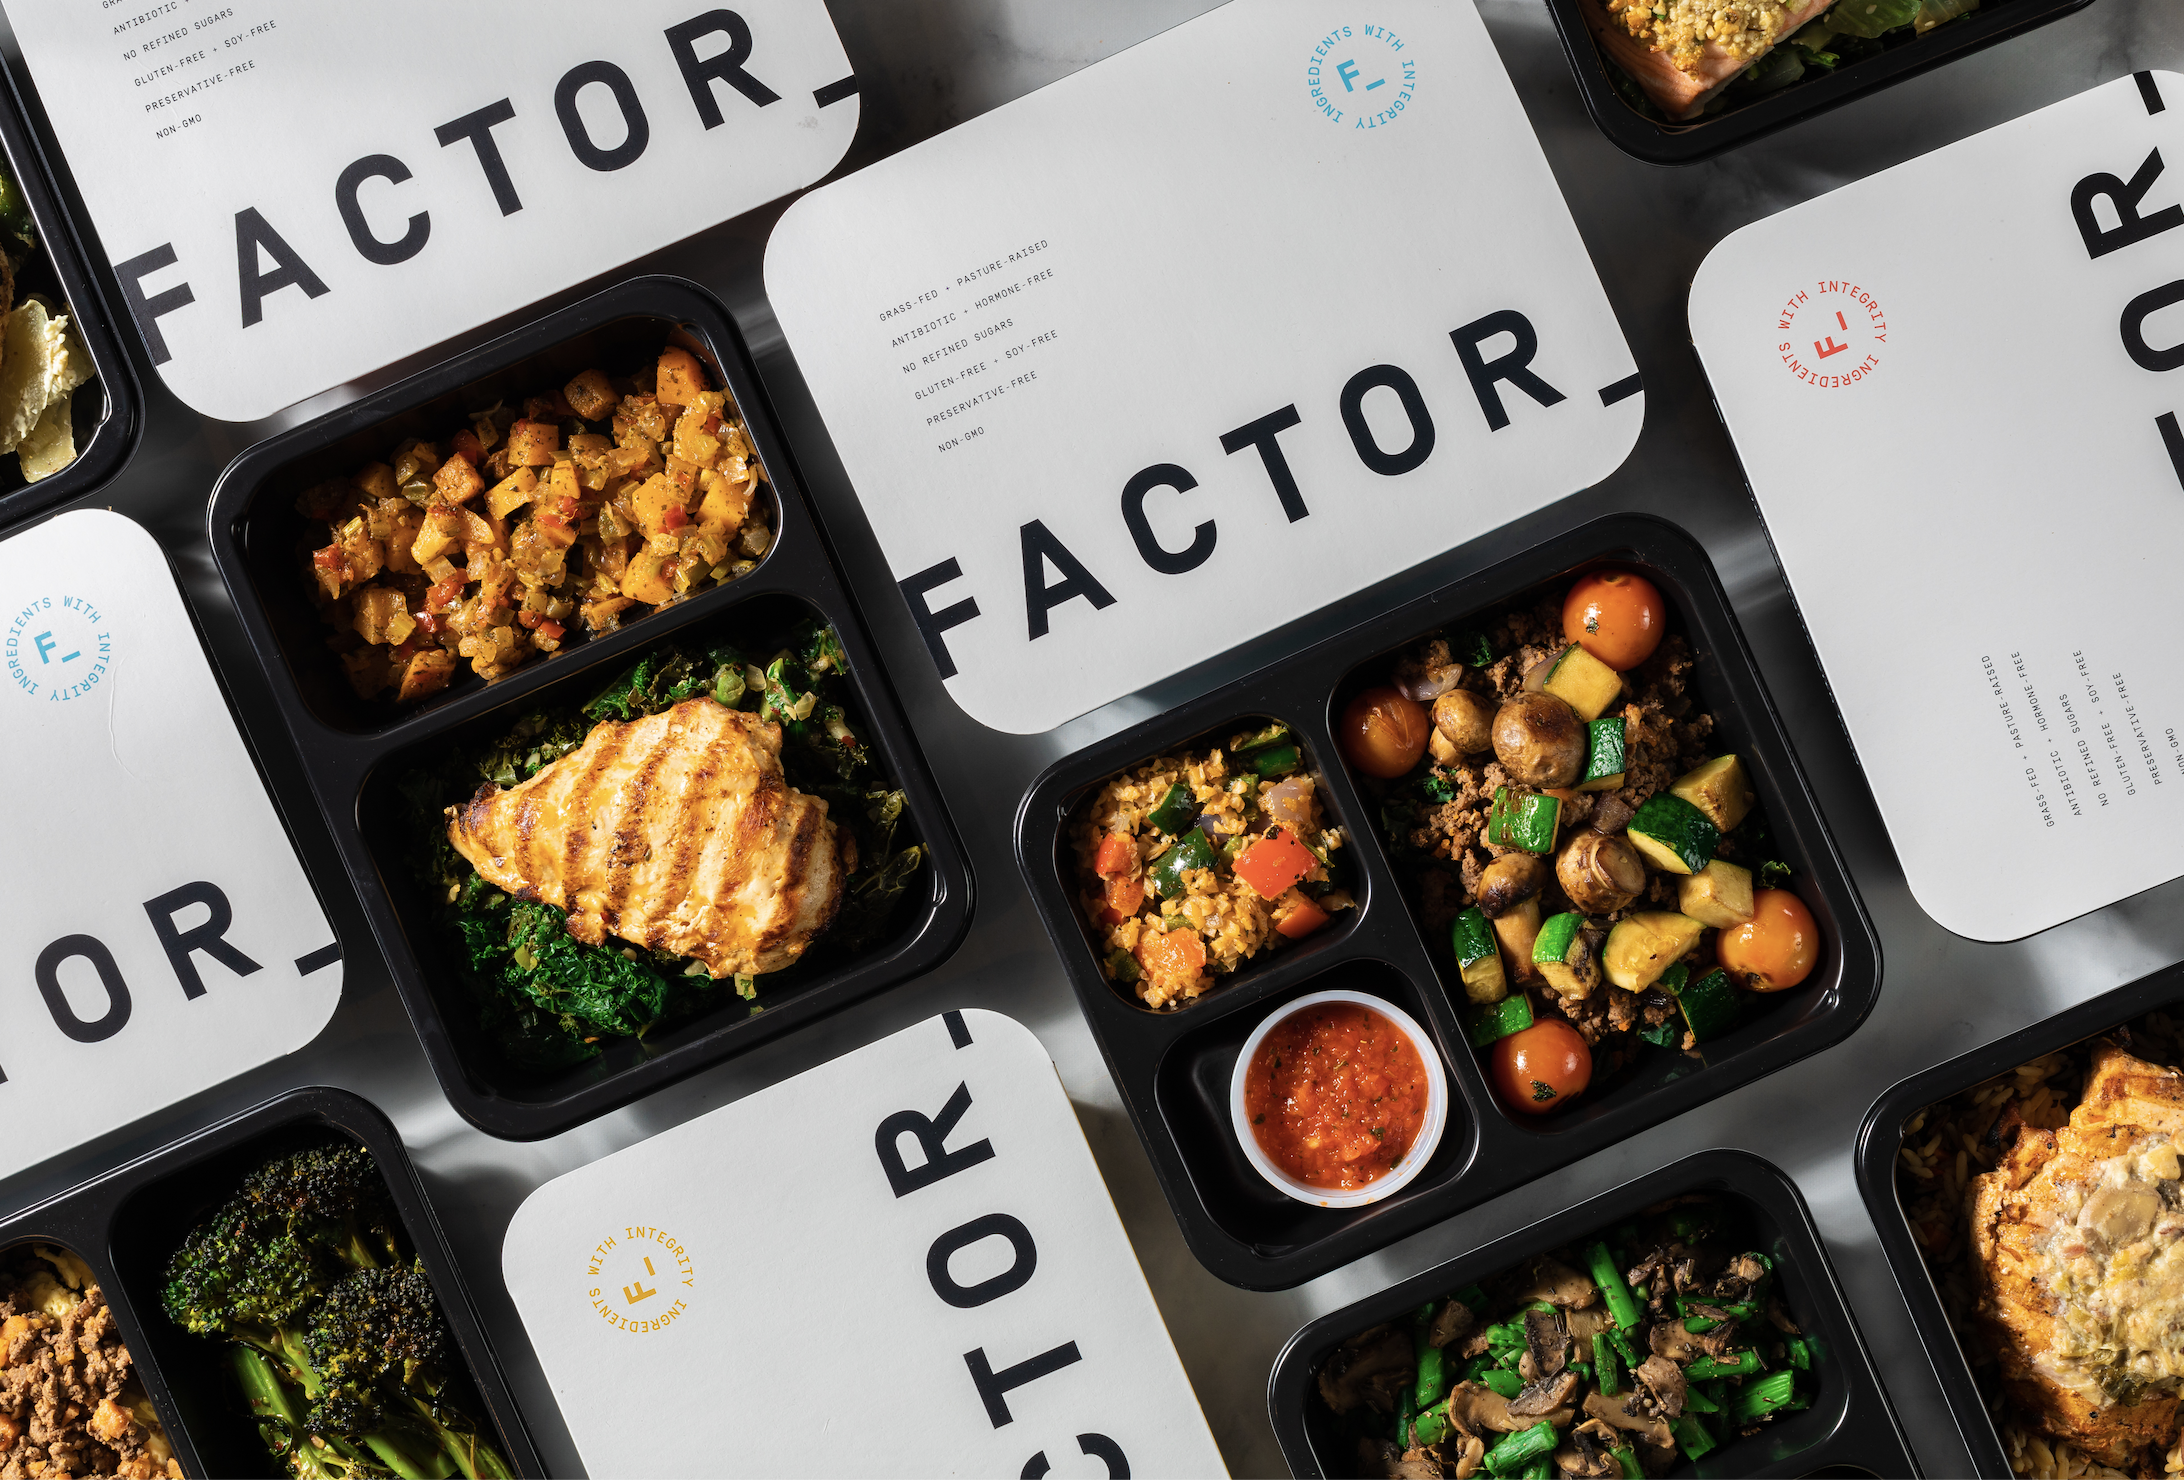 Factor 75 Review: Keto Meal Delivery Service